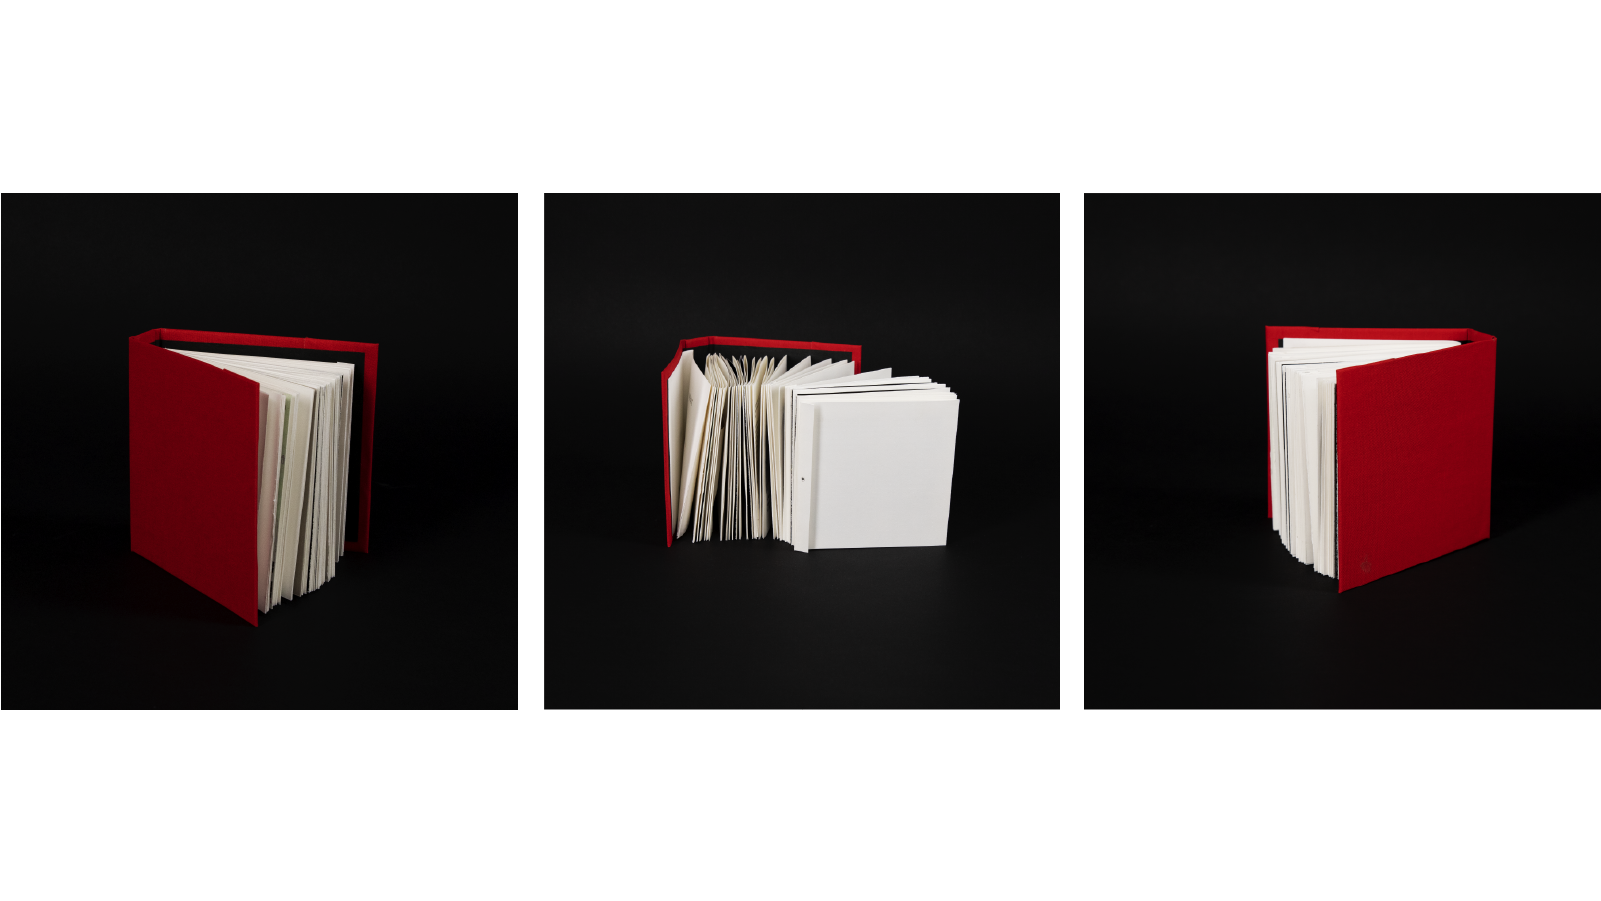 Red book placed at an angle with pages facing right corner of the screen. Pages are attached as an accordion, part of the accordion has been pulled out of the book and a part of the middle of the book is placed in a zigzag pattern, a one-third end of the book is in a stack on the right edge of the frame.